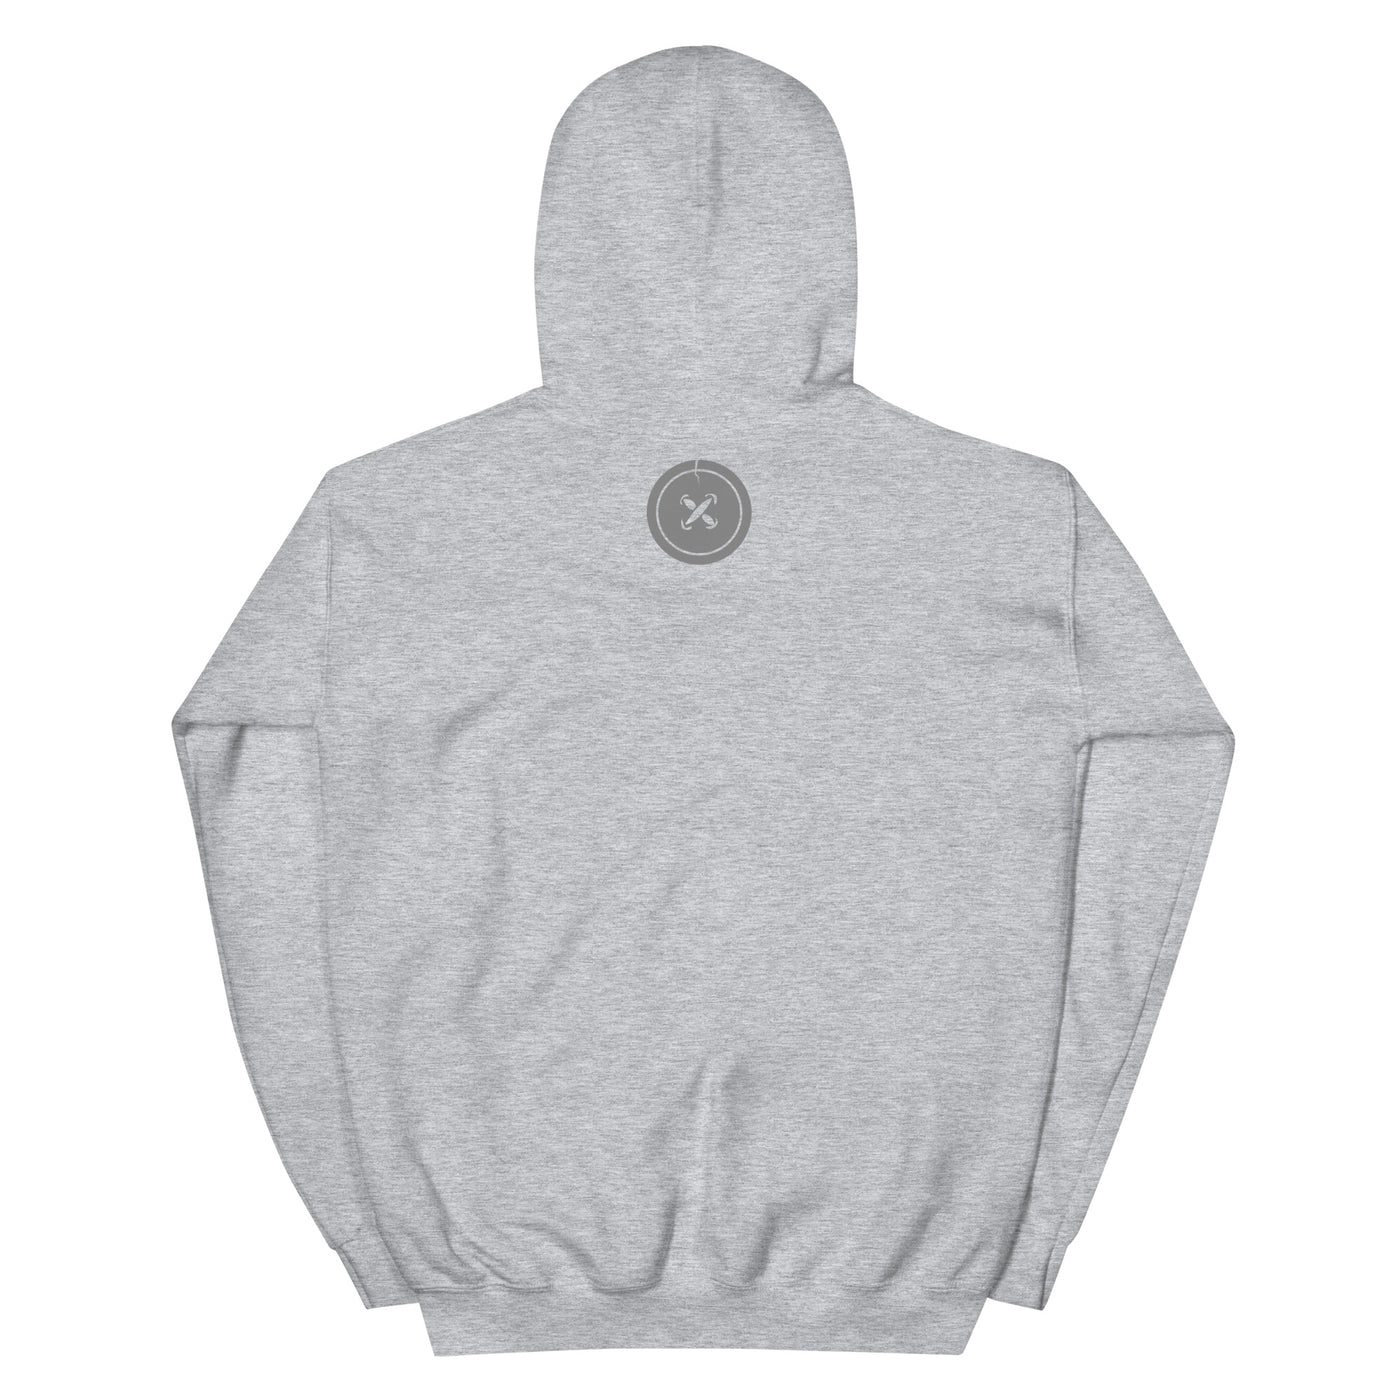 UNC Plugged In hoodie (Raiders edition) - Unique Sweatsuits, hats, tees, shorts, hoodies, Outwear & accessories online | Uneekly Nsane